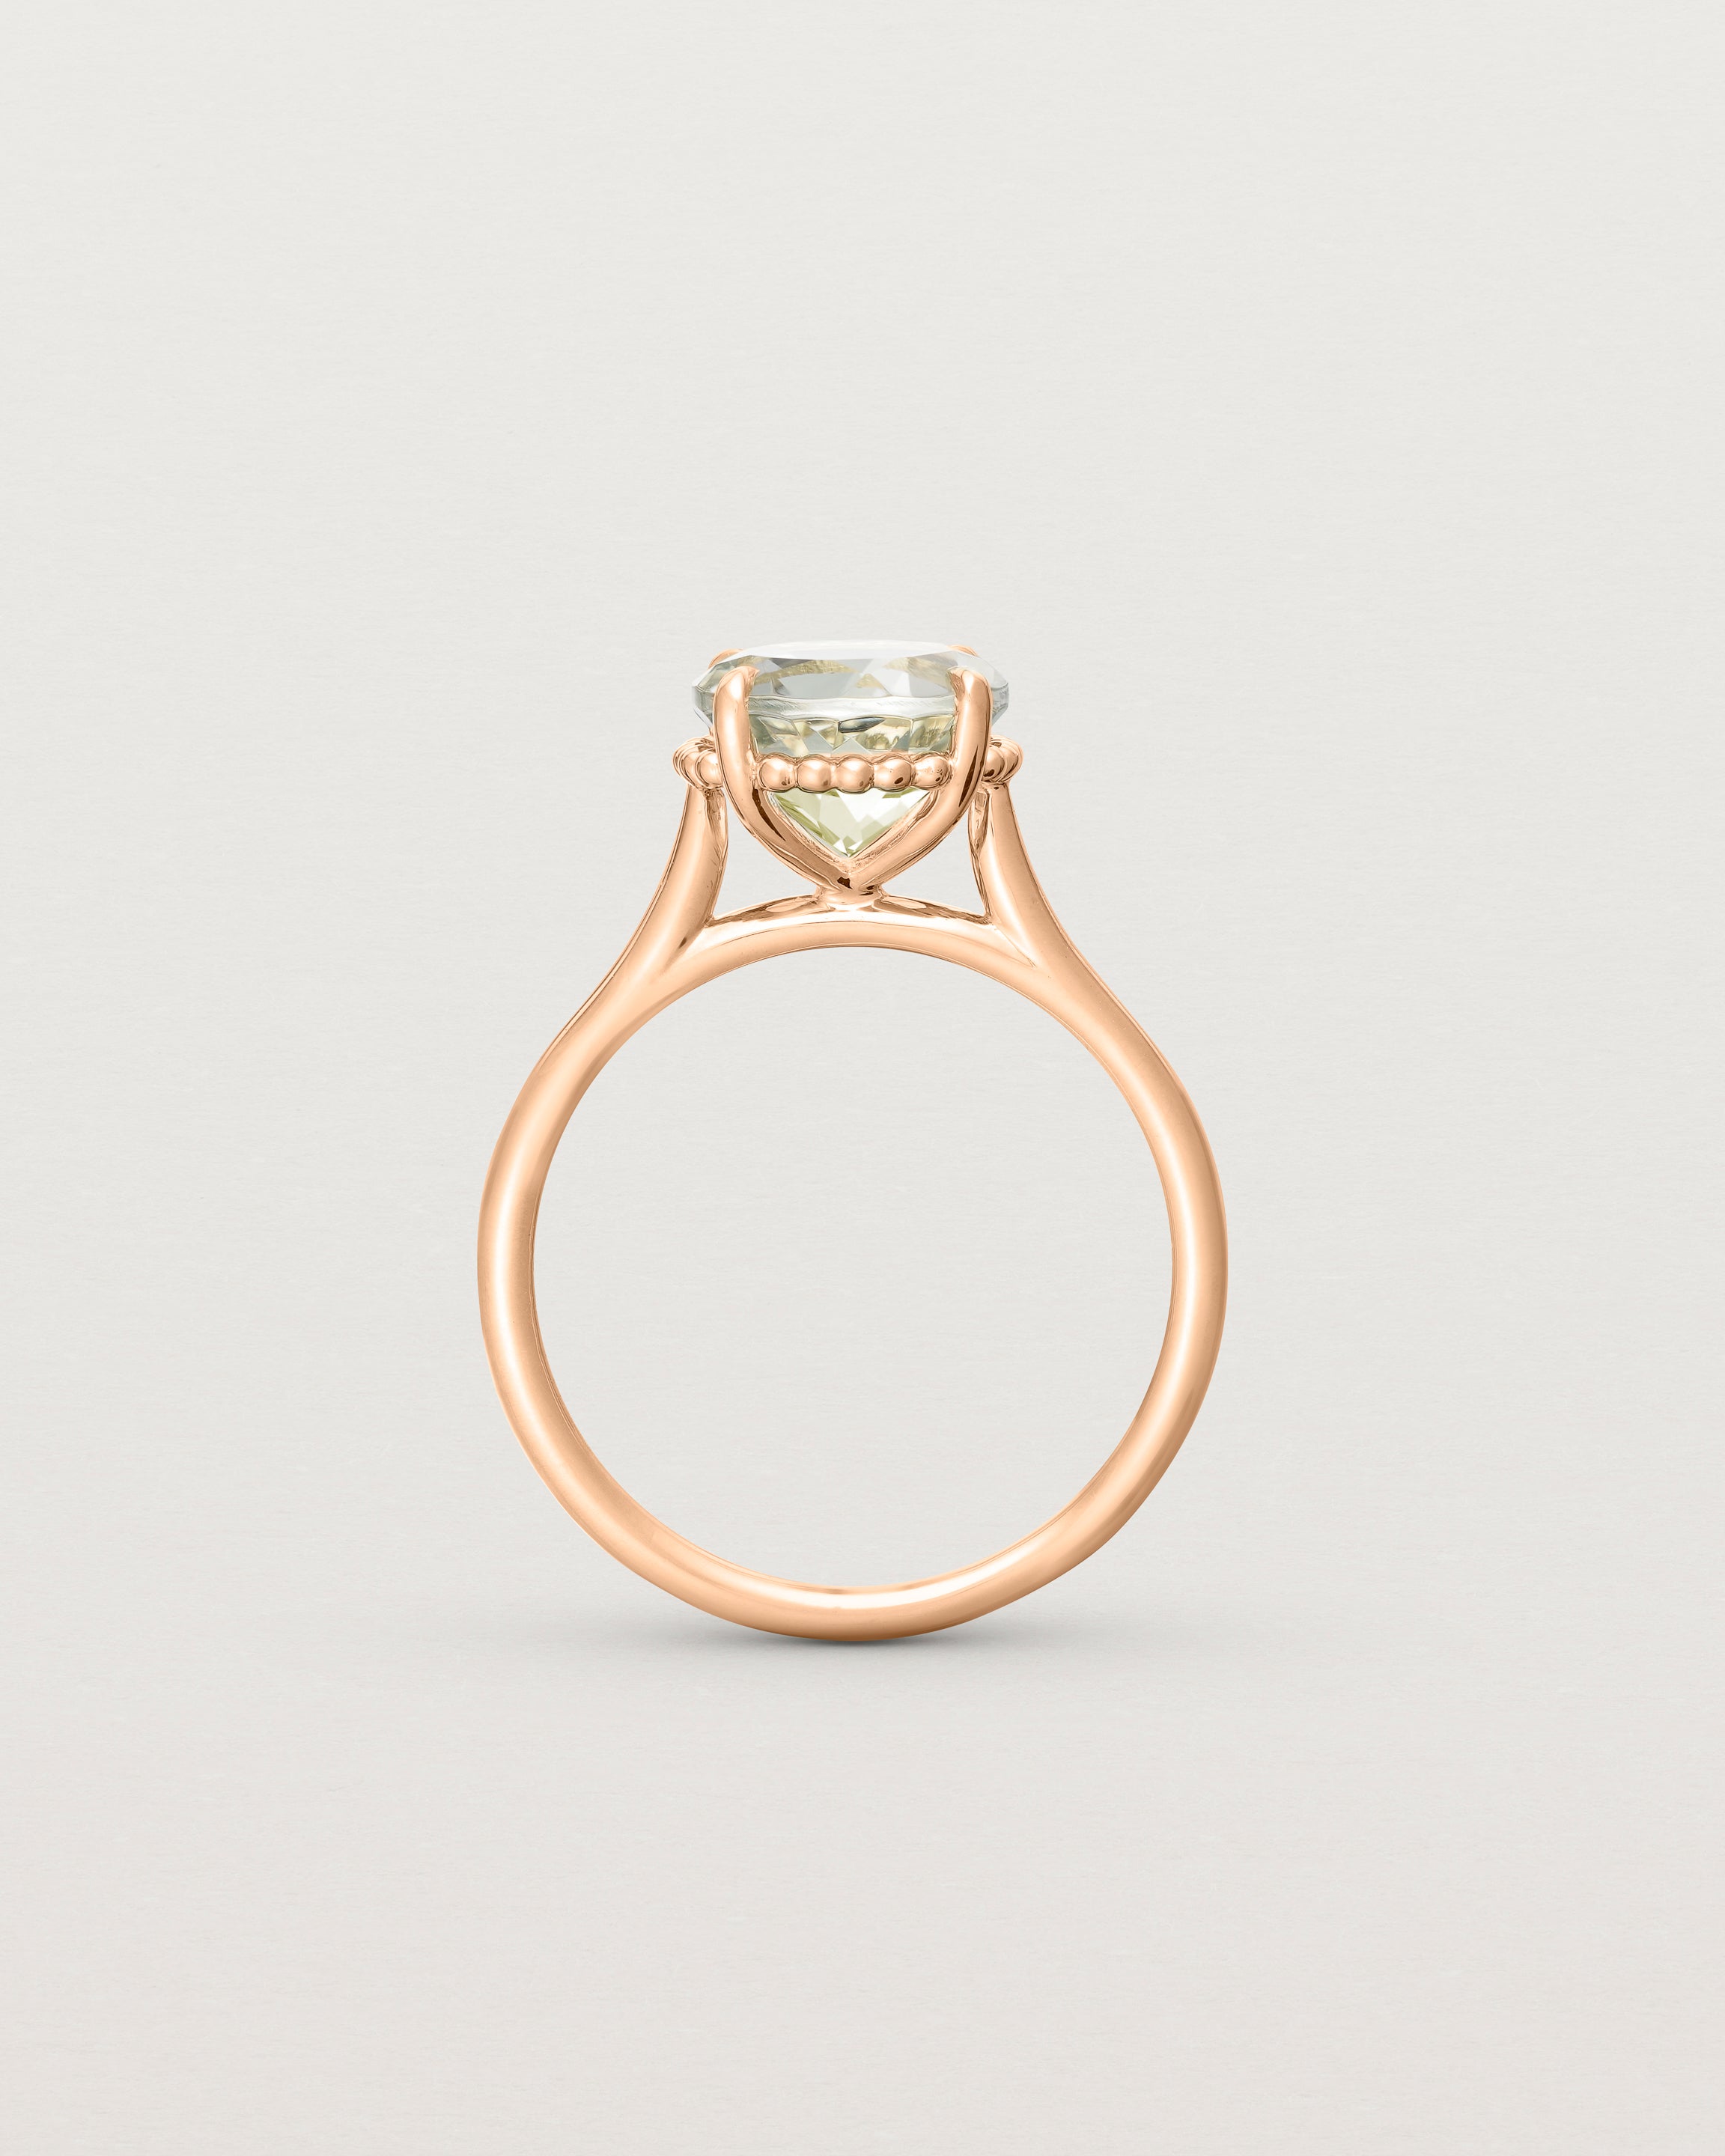 standing view of the Thea Round Solitaire | Green Amethyst in rose gold.